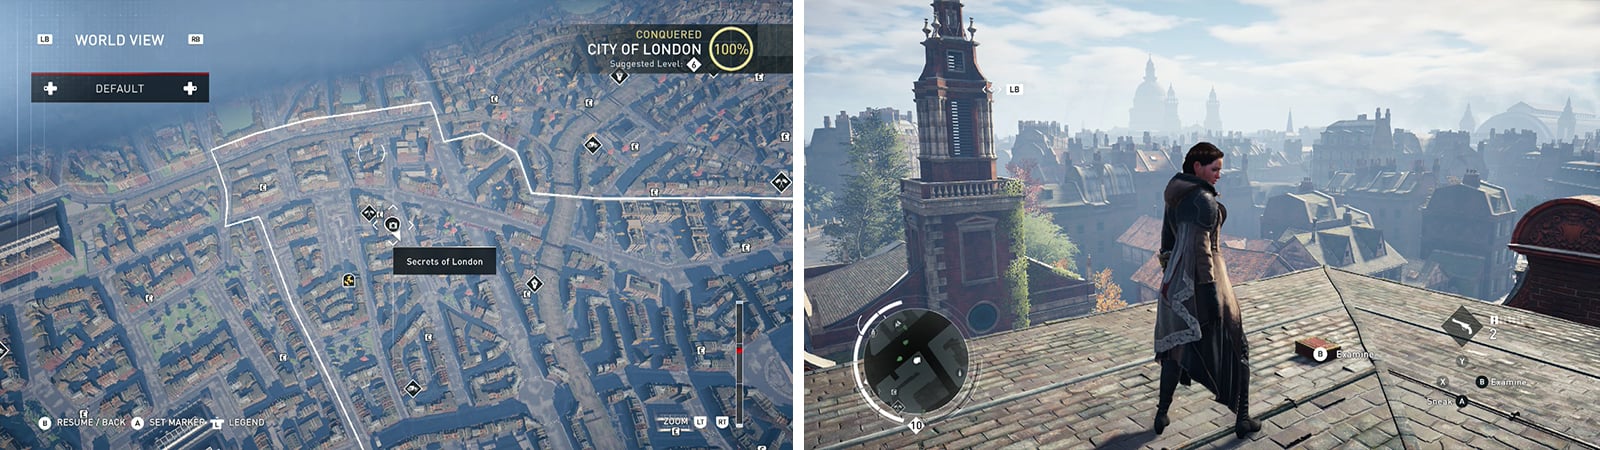 The Secrets of London icon on the world map (left) and what they look like in-game (right).